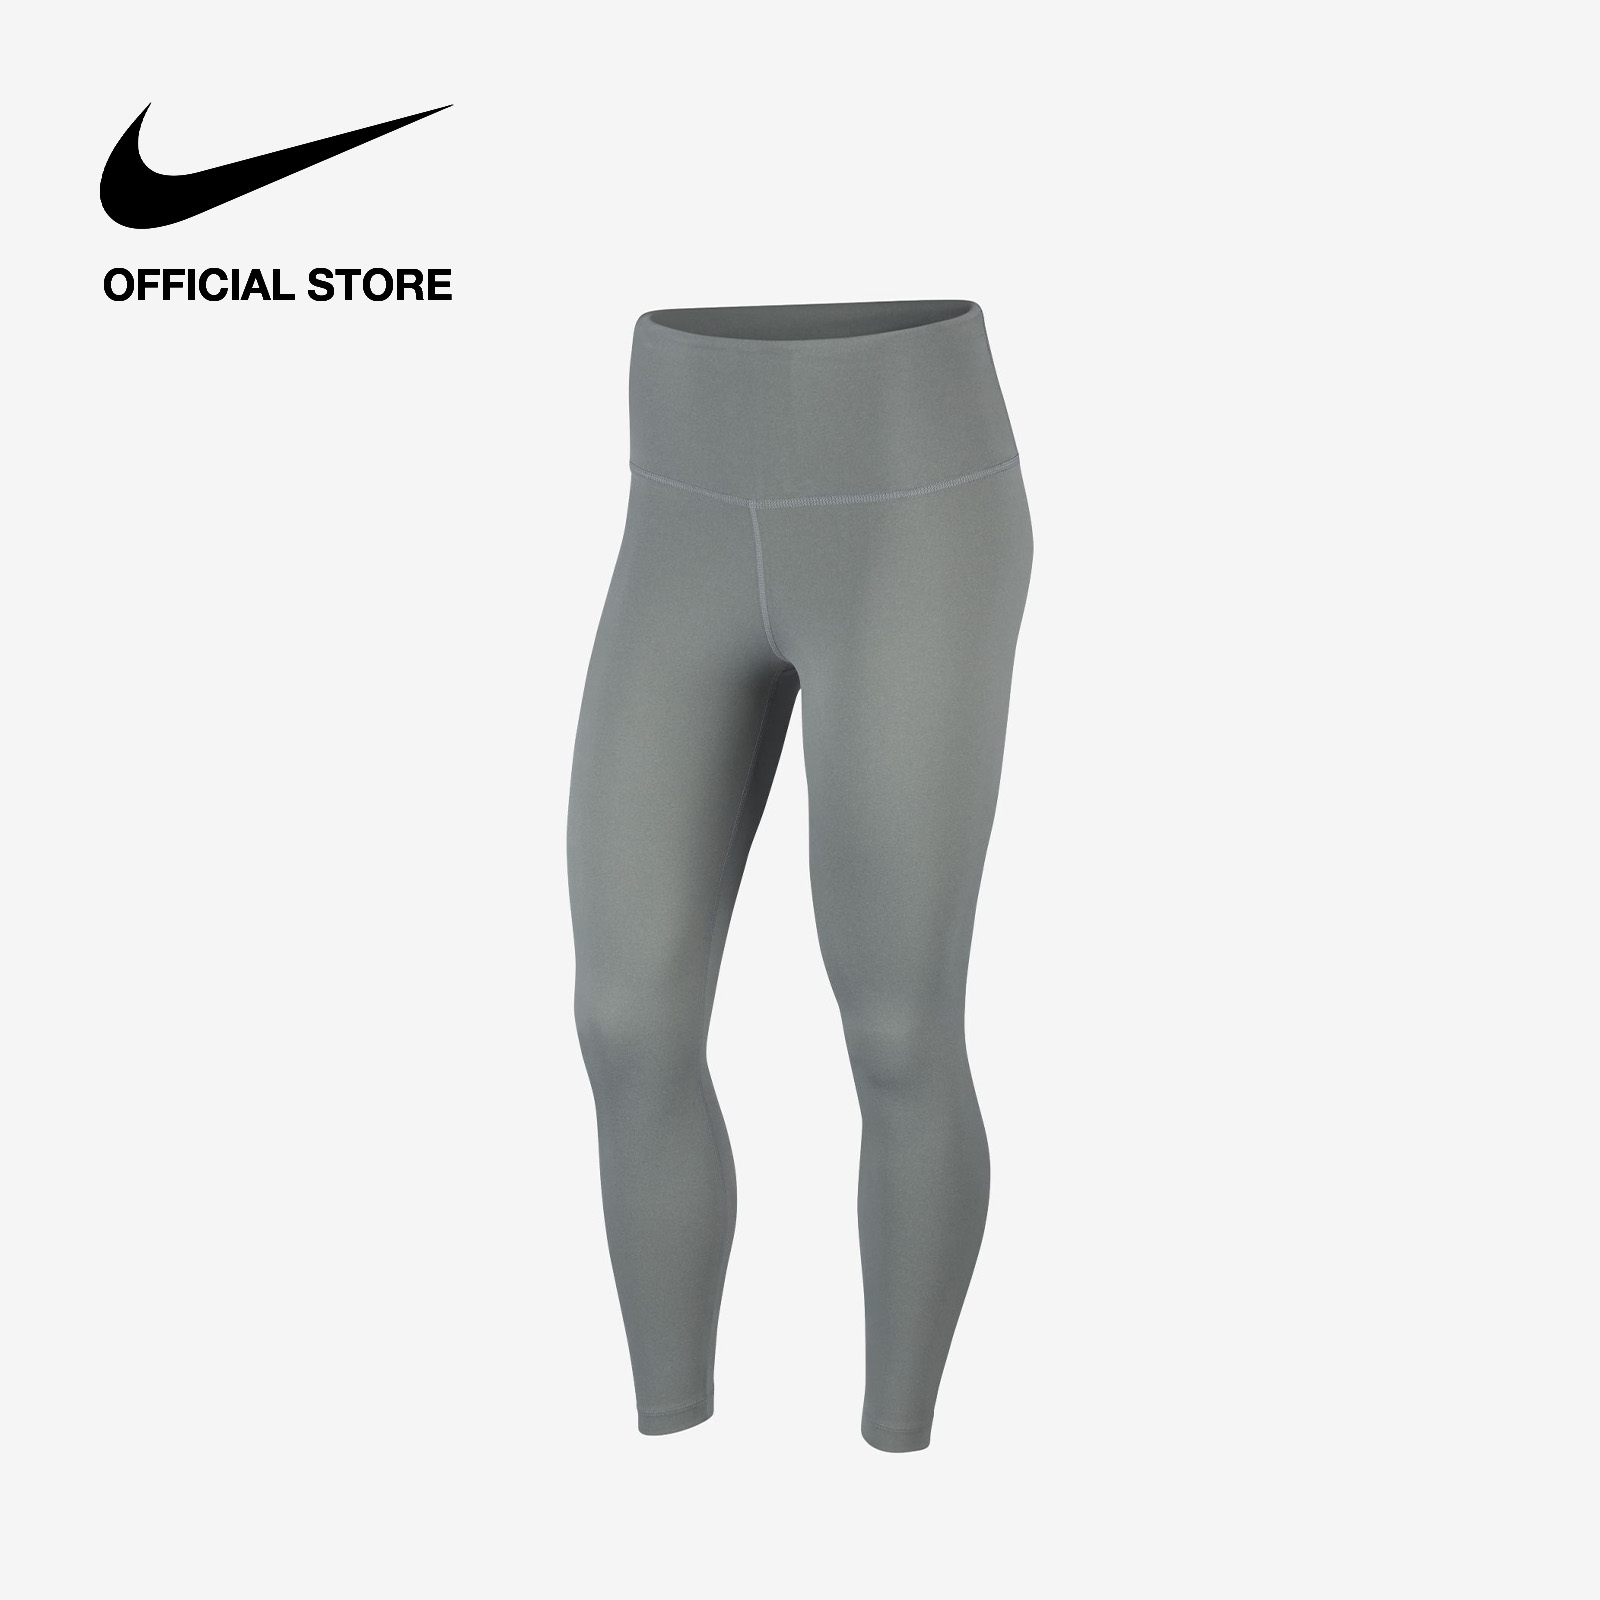 Nike Women's Yoga Luxe High Rise 7/8 Length Tights (Particle Grey